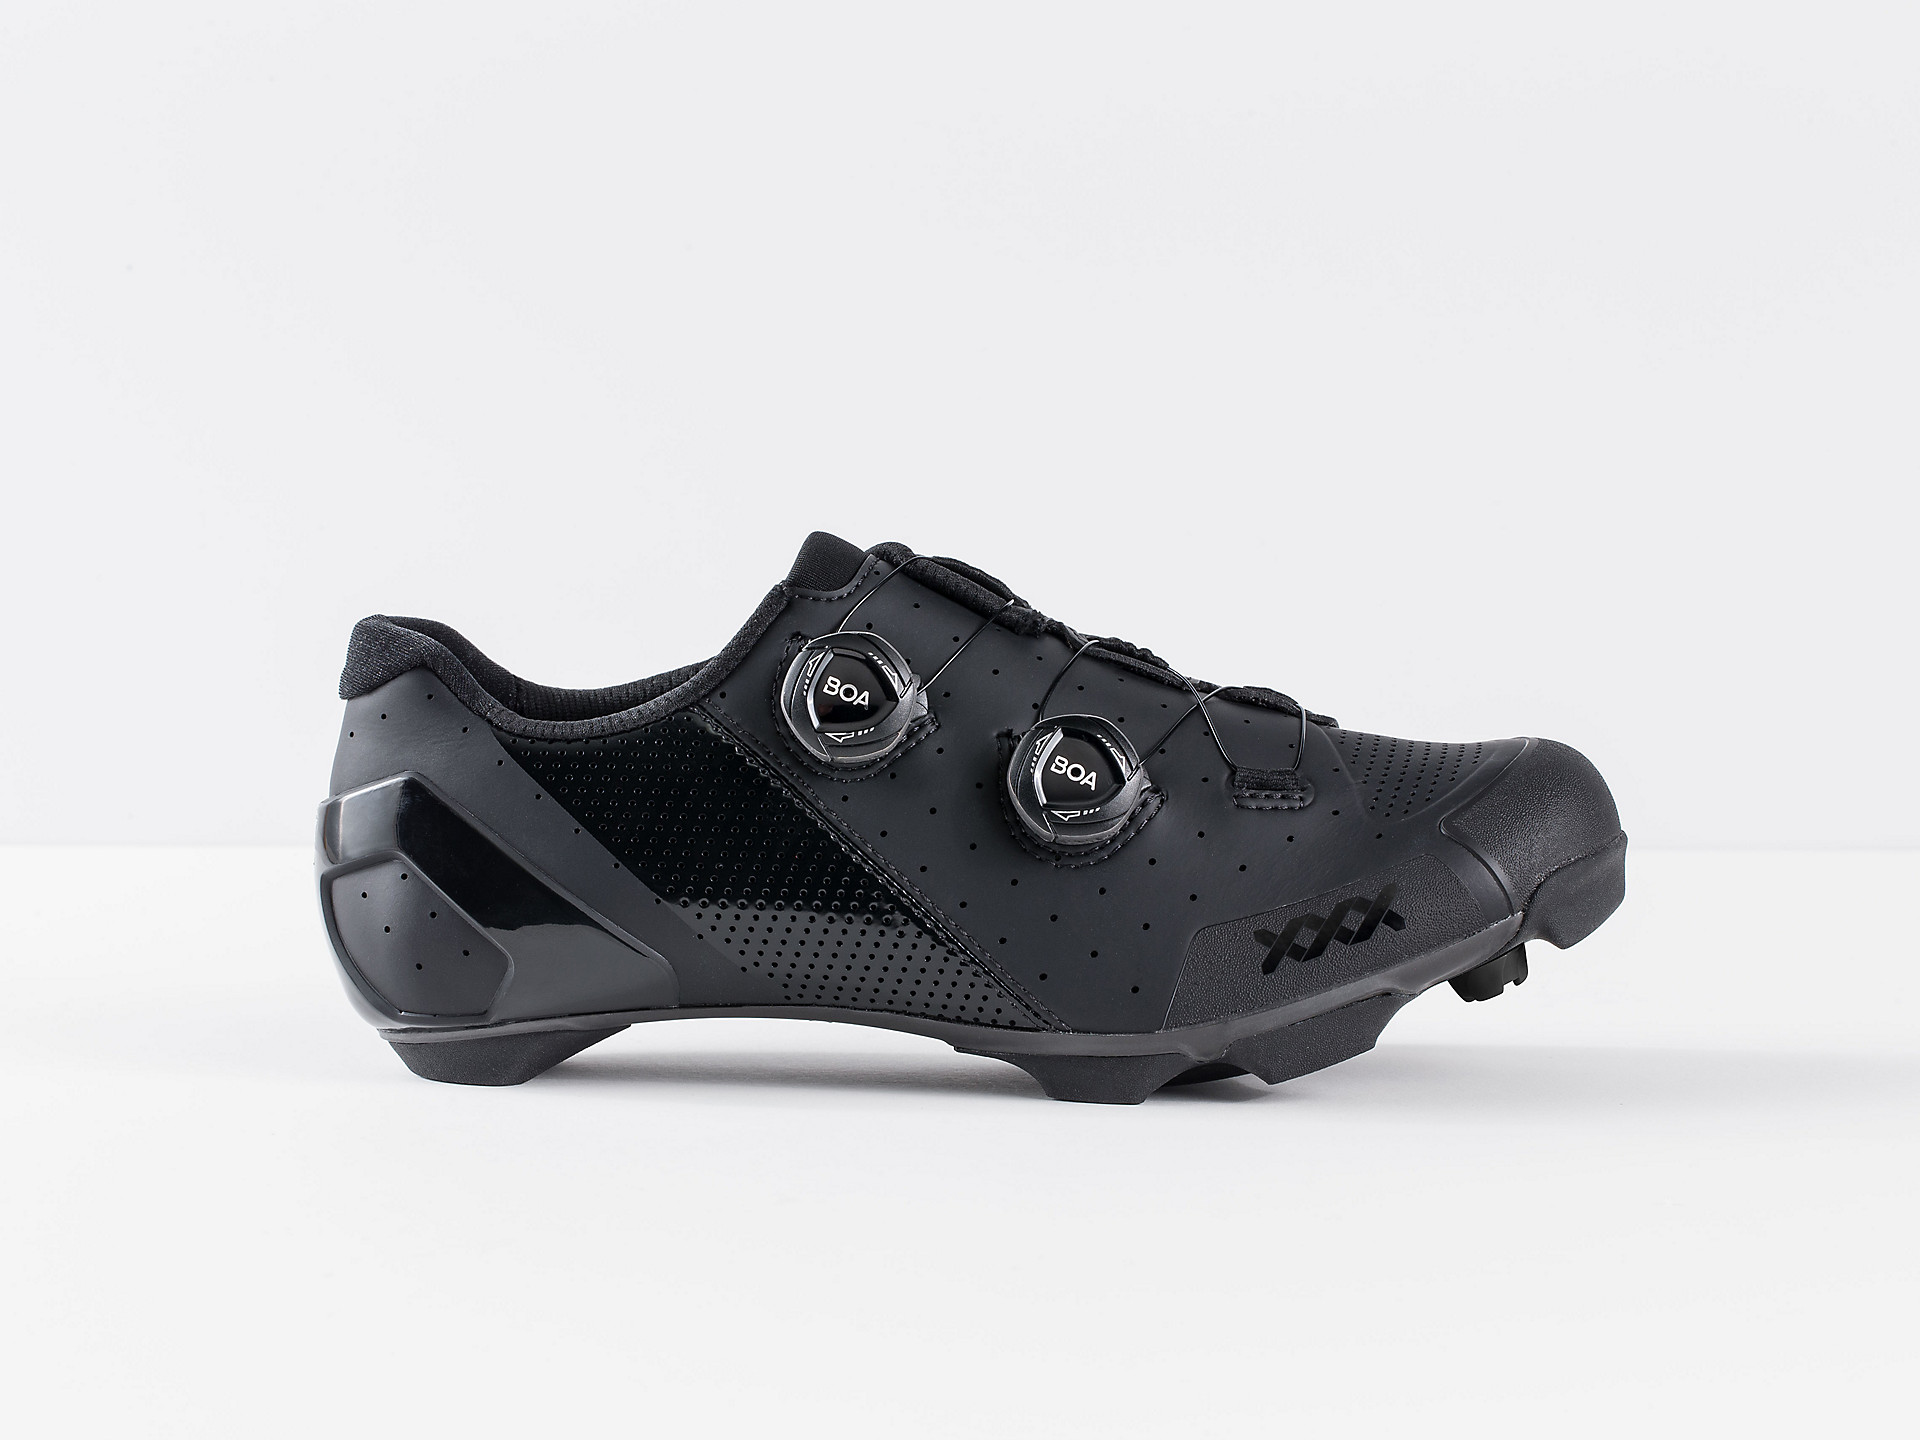 <a href="https://cycles-clement.be/product/chaussures-bont-xxx-mtb-38-black/">CHAUSSURES BONT XXX MTB 38 BLACK</a>